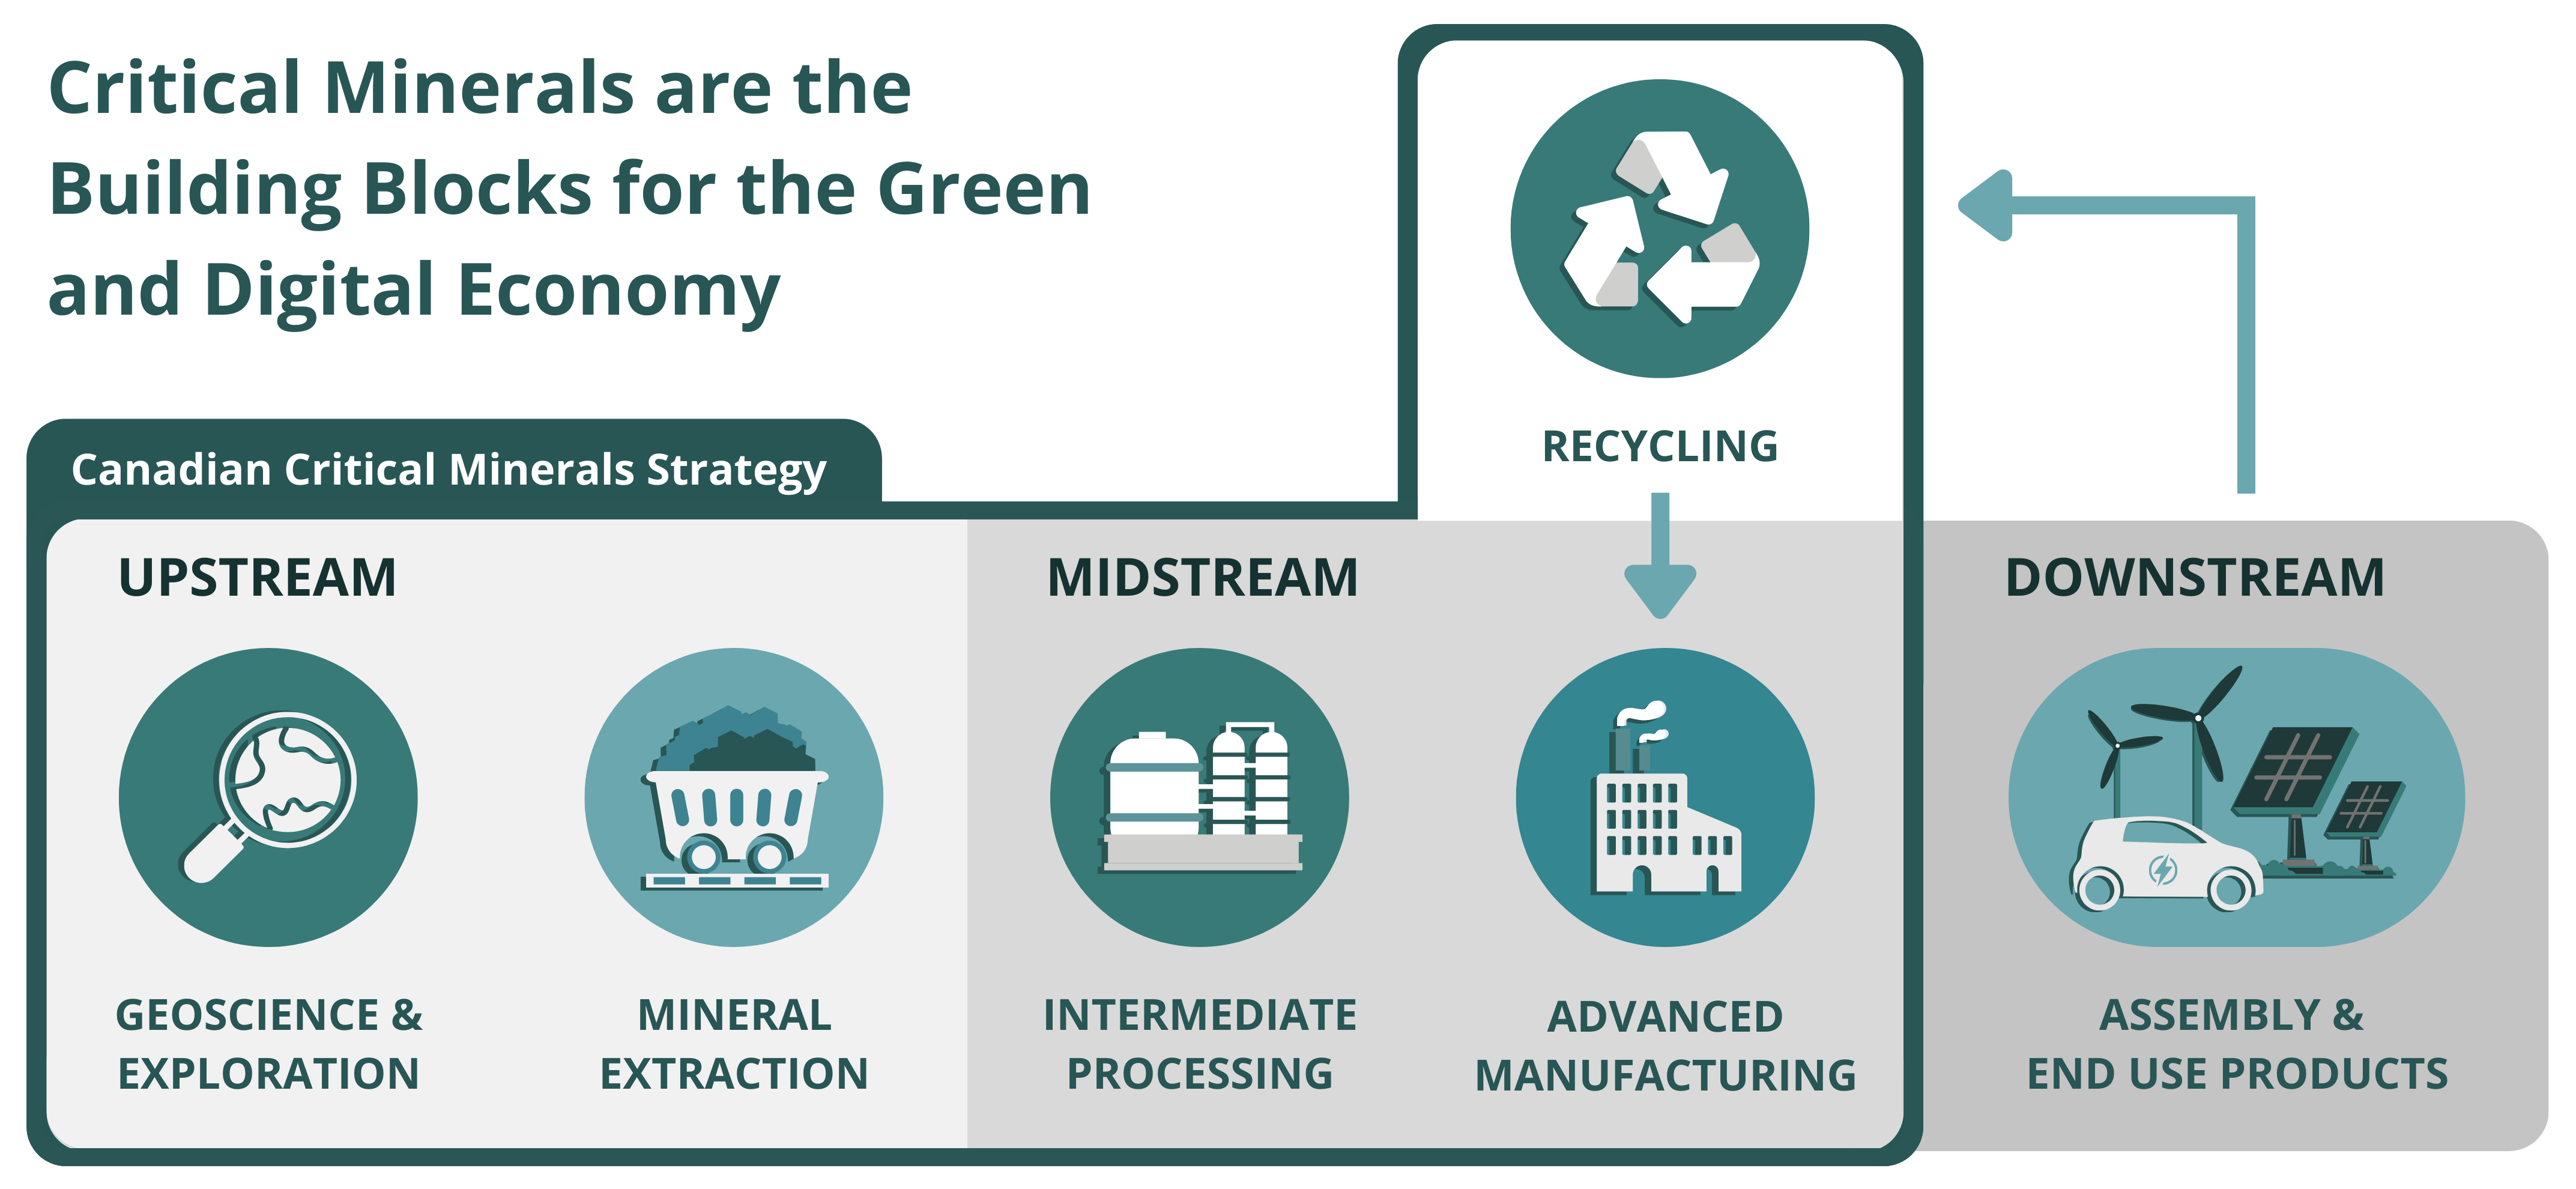 The Value Chain of Critical Minerals Addressed in This Strategy: From Exploration to Recycling